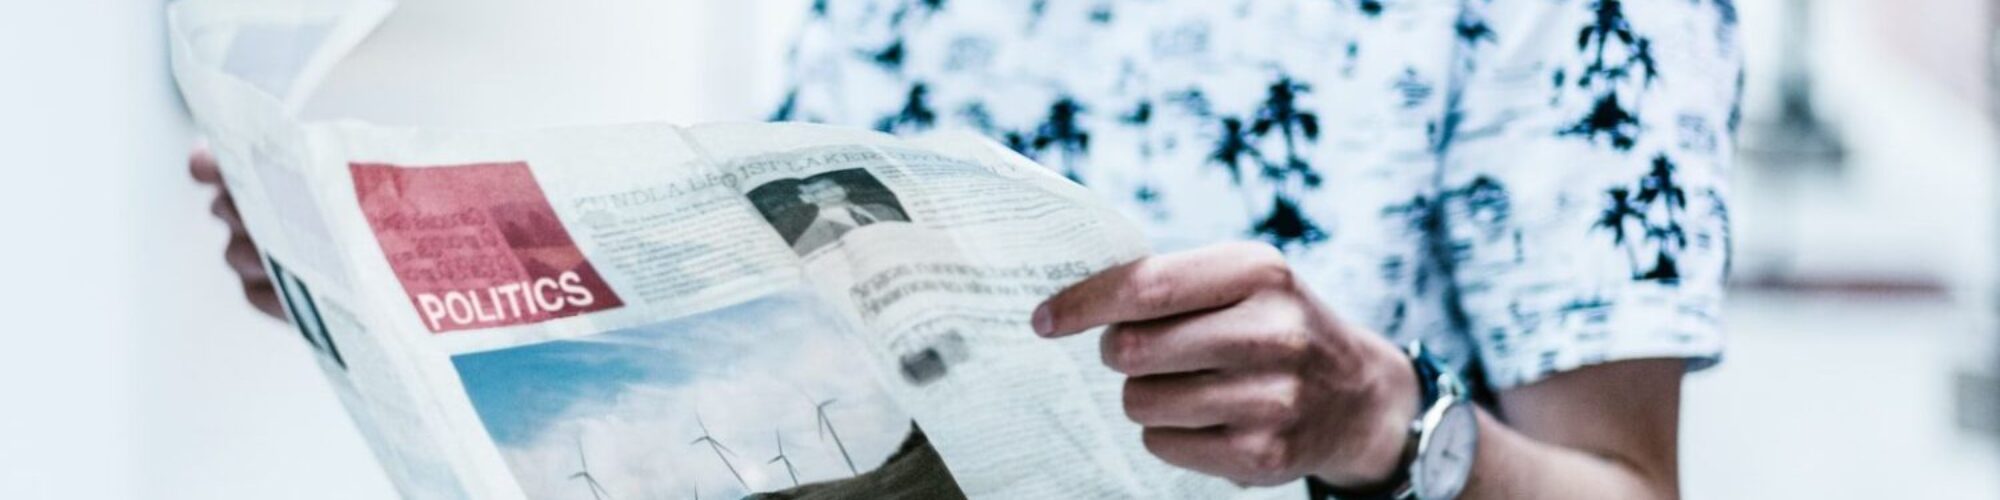 selective focus photography of person holding newspaper